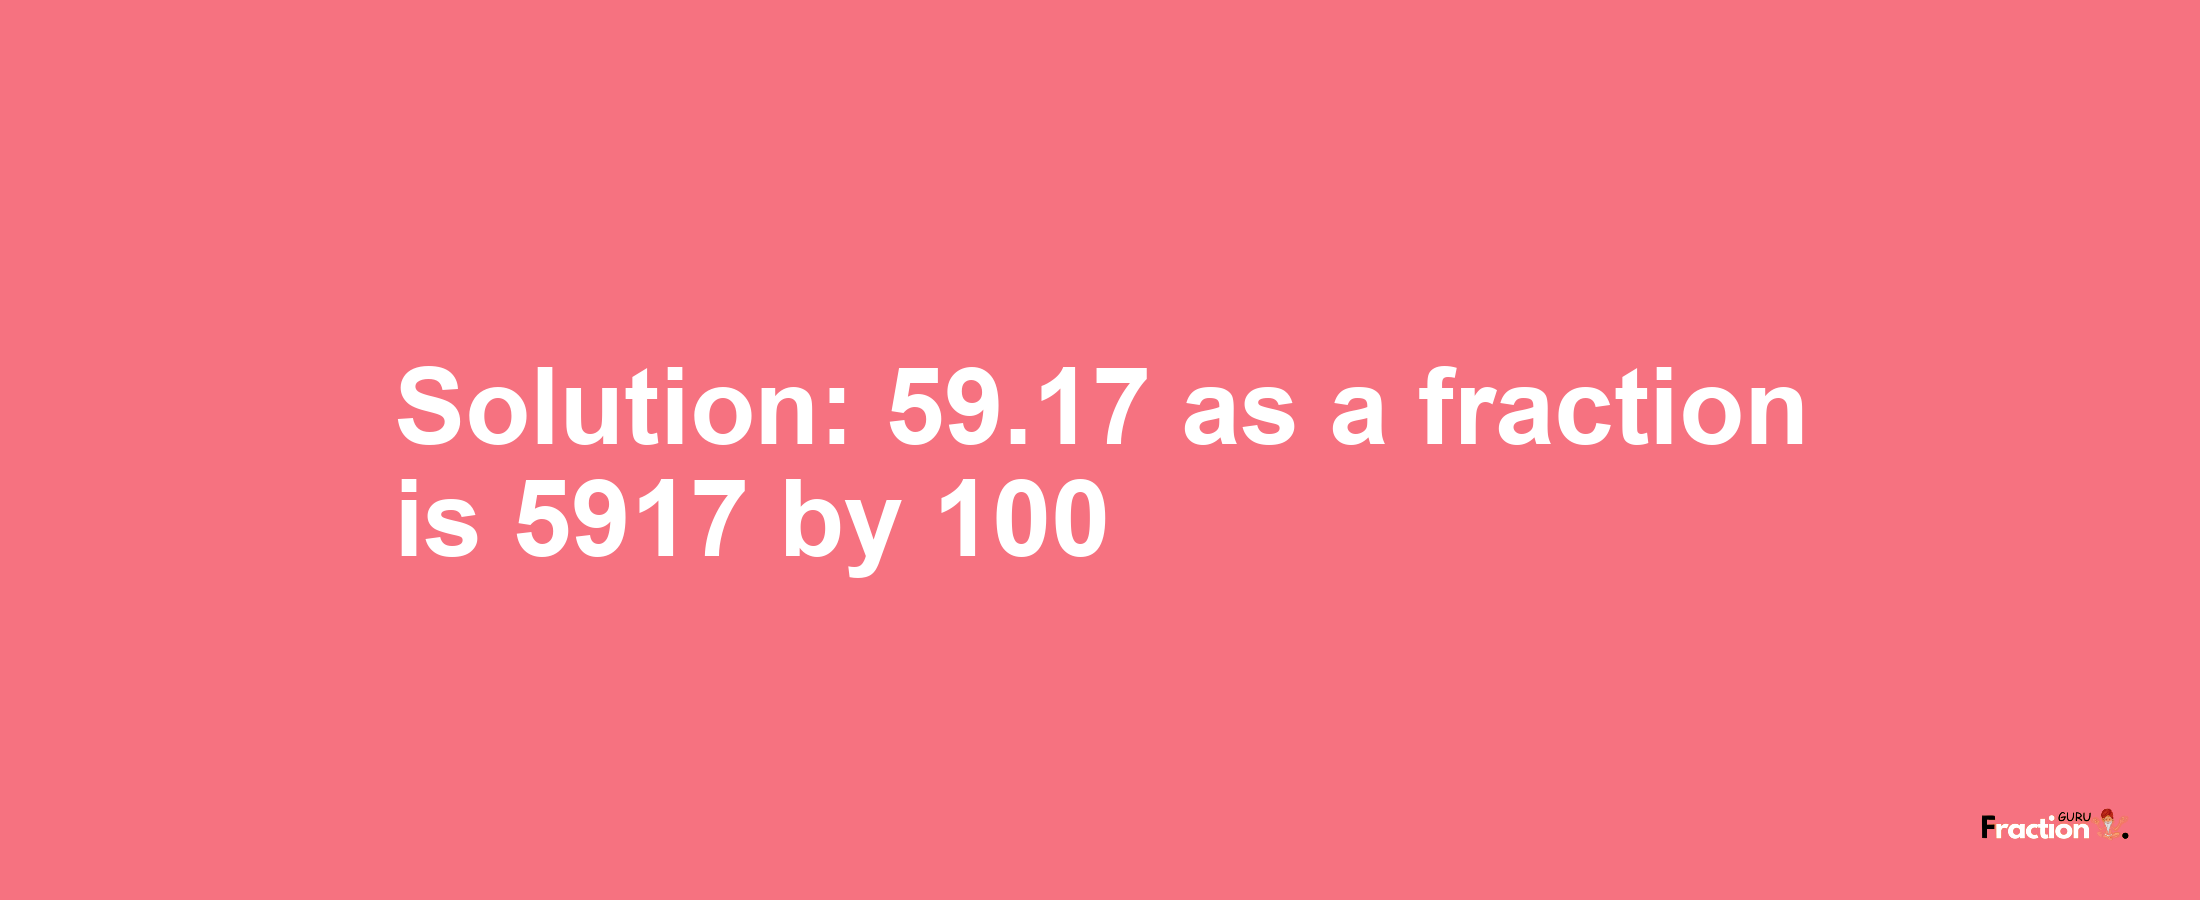 Solution:59.17 as a fraction is 5917/100